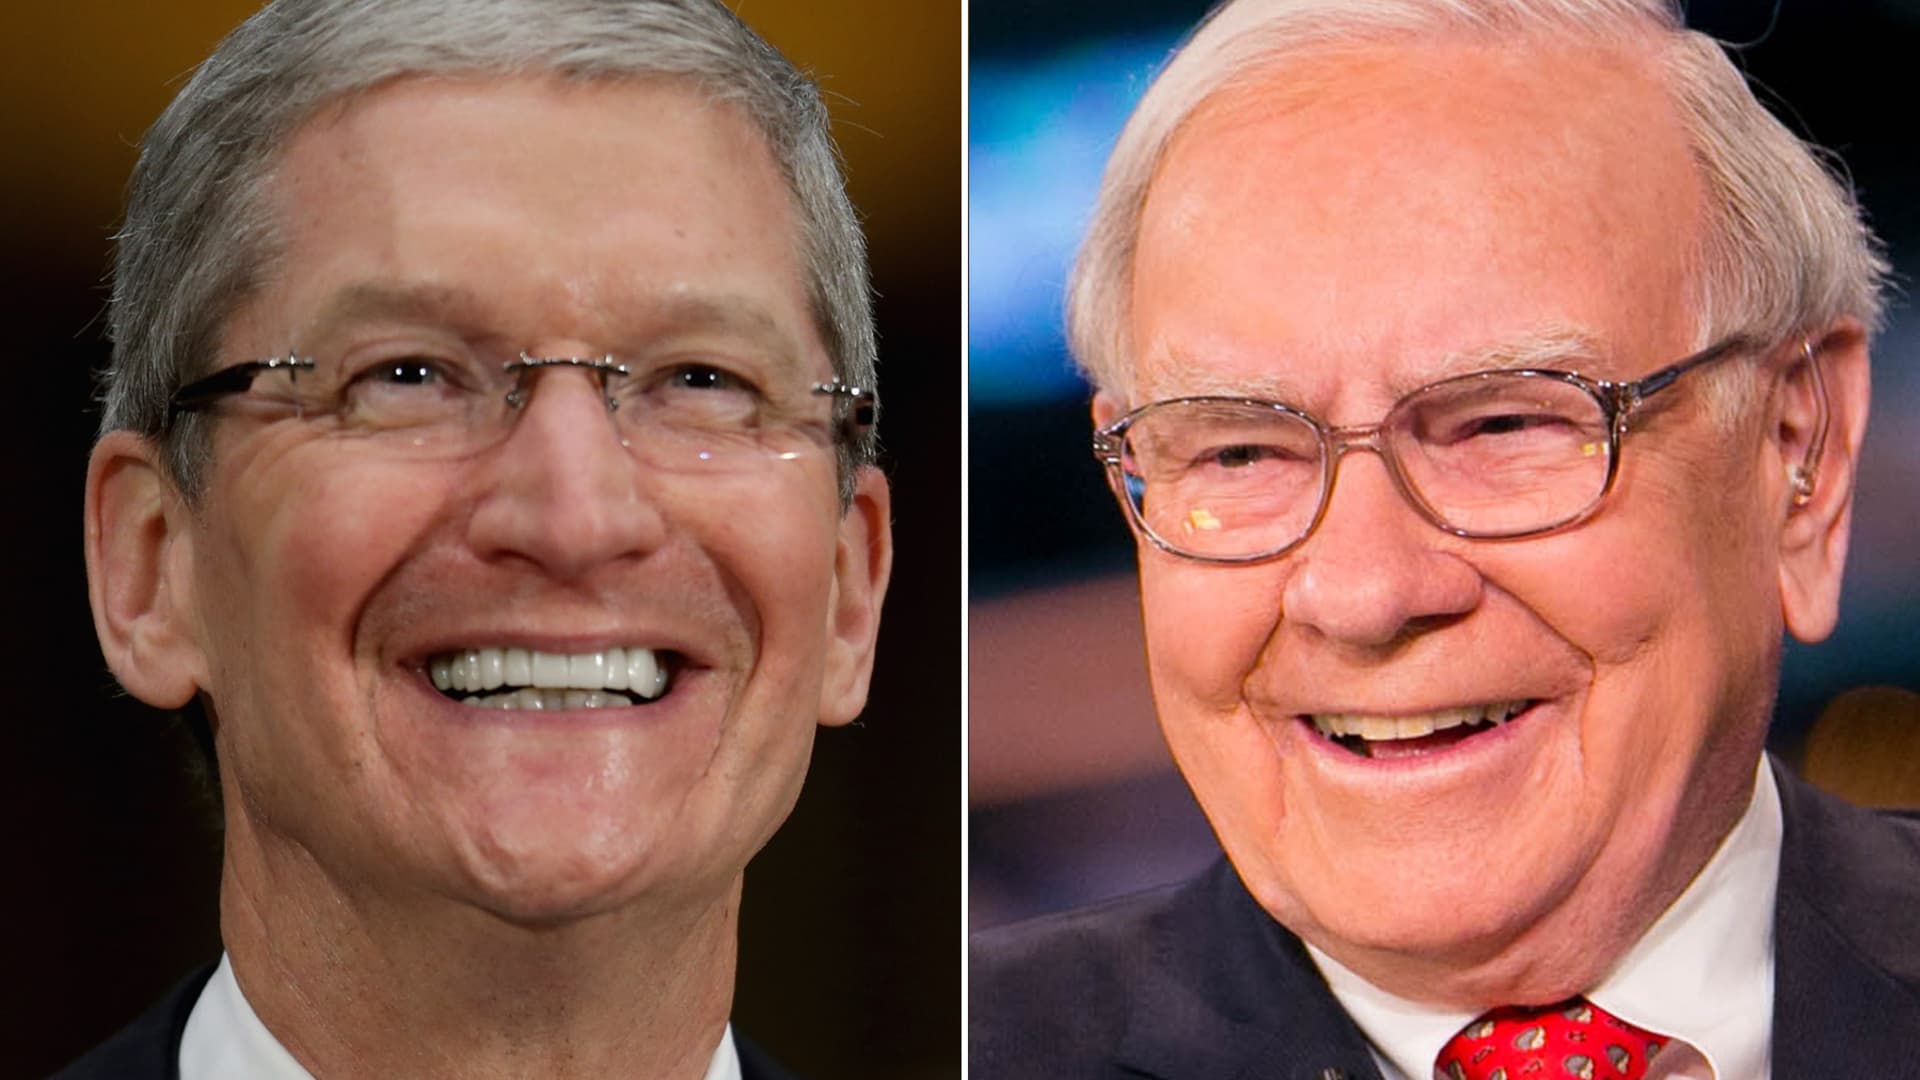 Apple is Buffett's biggest stock but moat thesis faces questions